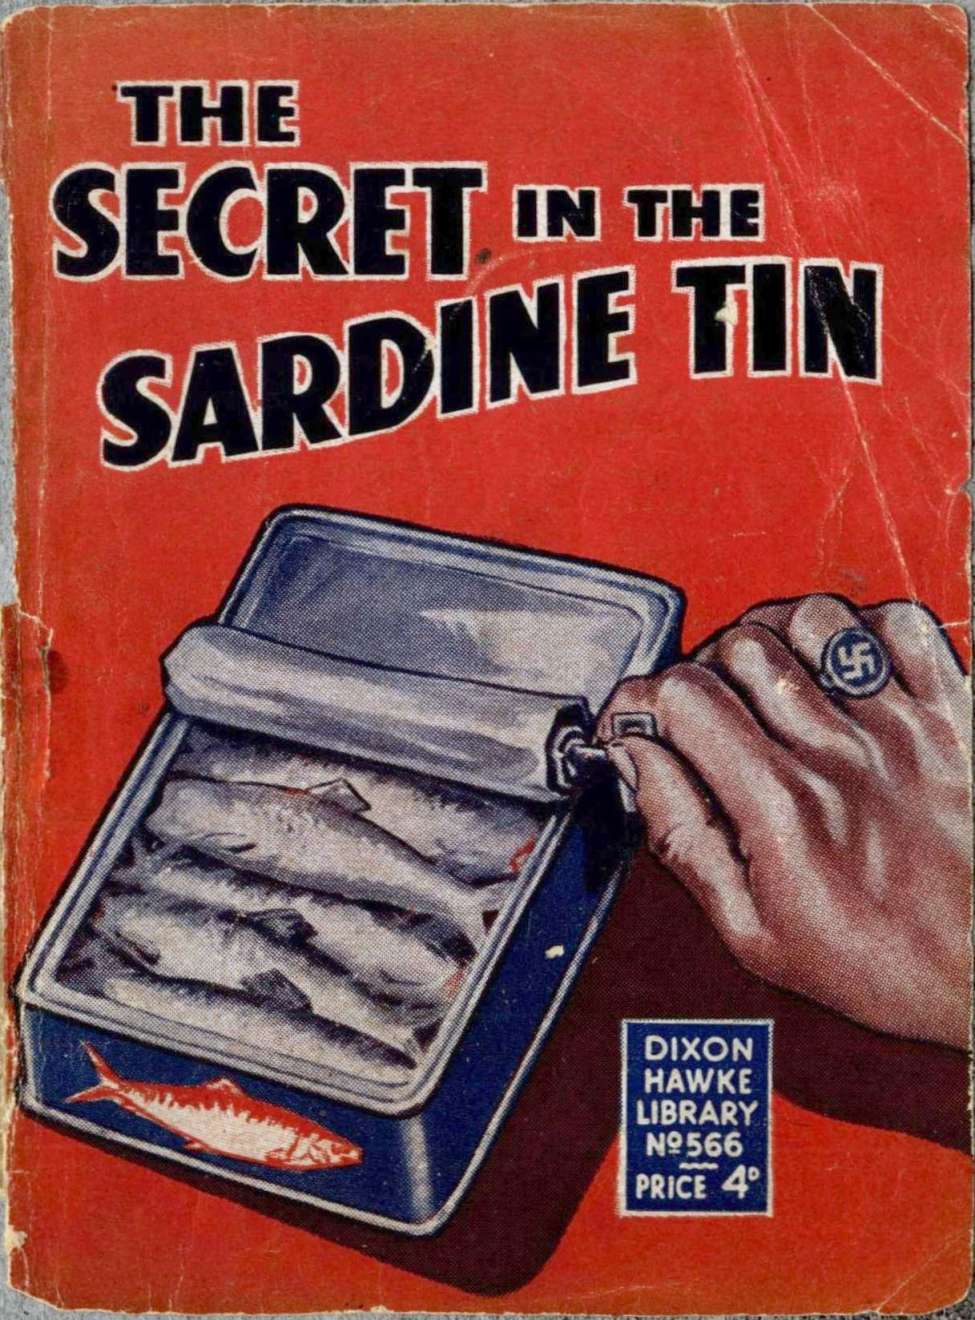 Comic Book Cover For Dixon Hawke Library 566 - The Secret of the Sardine Tin